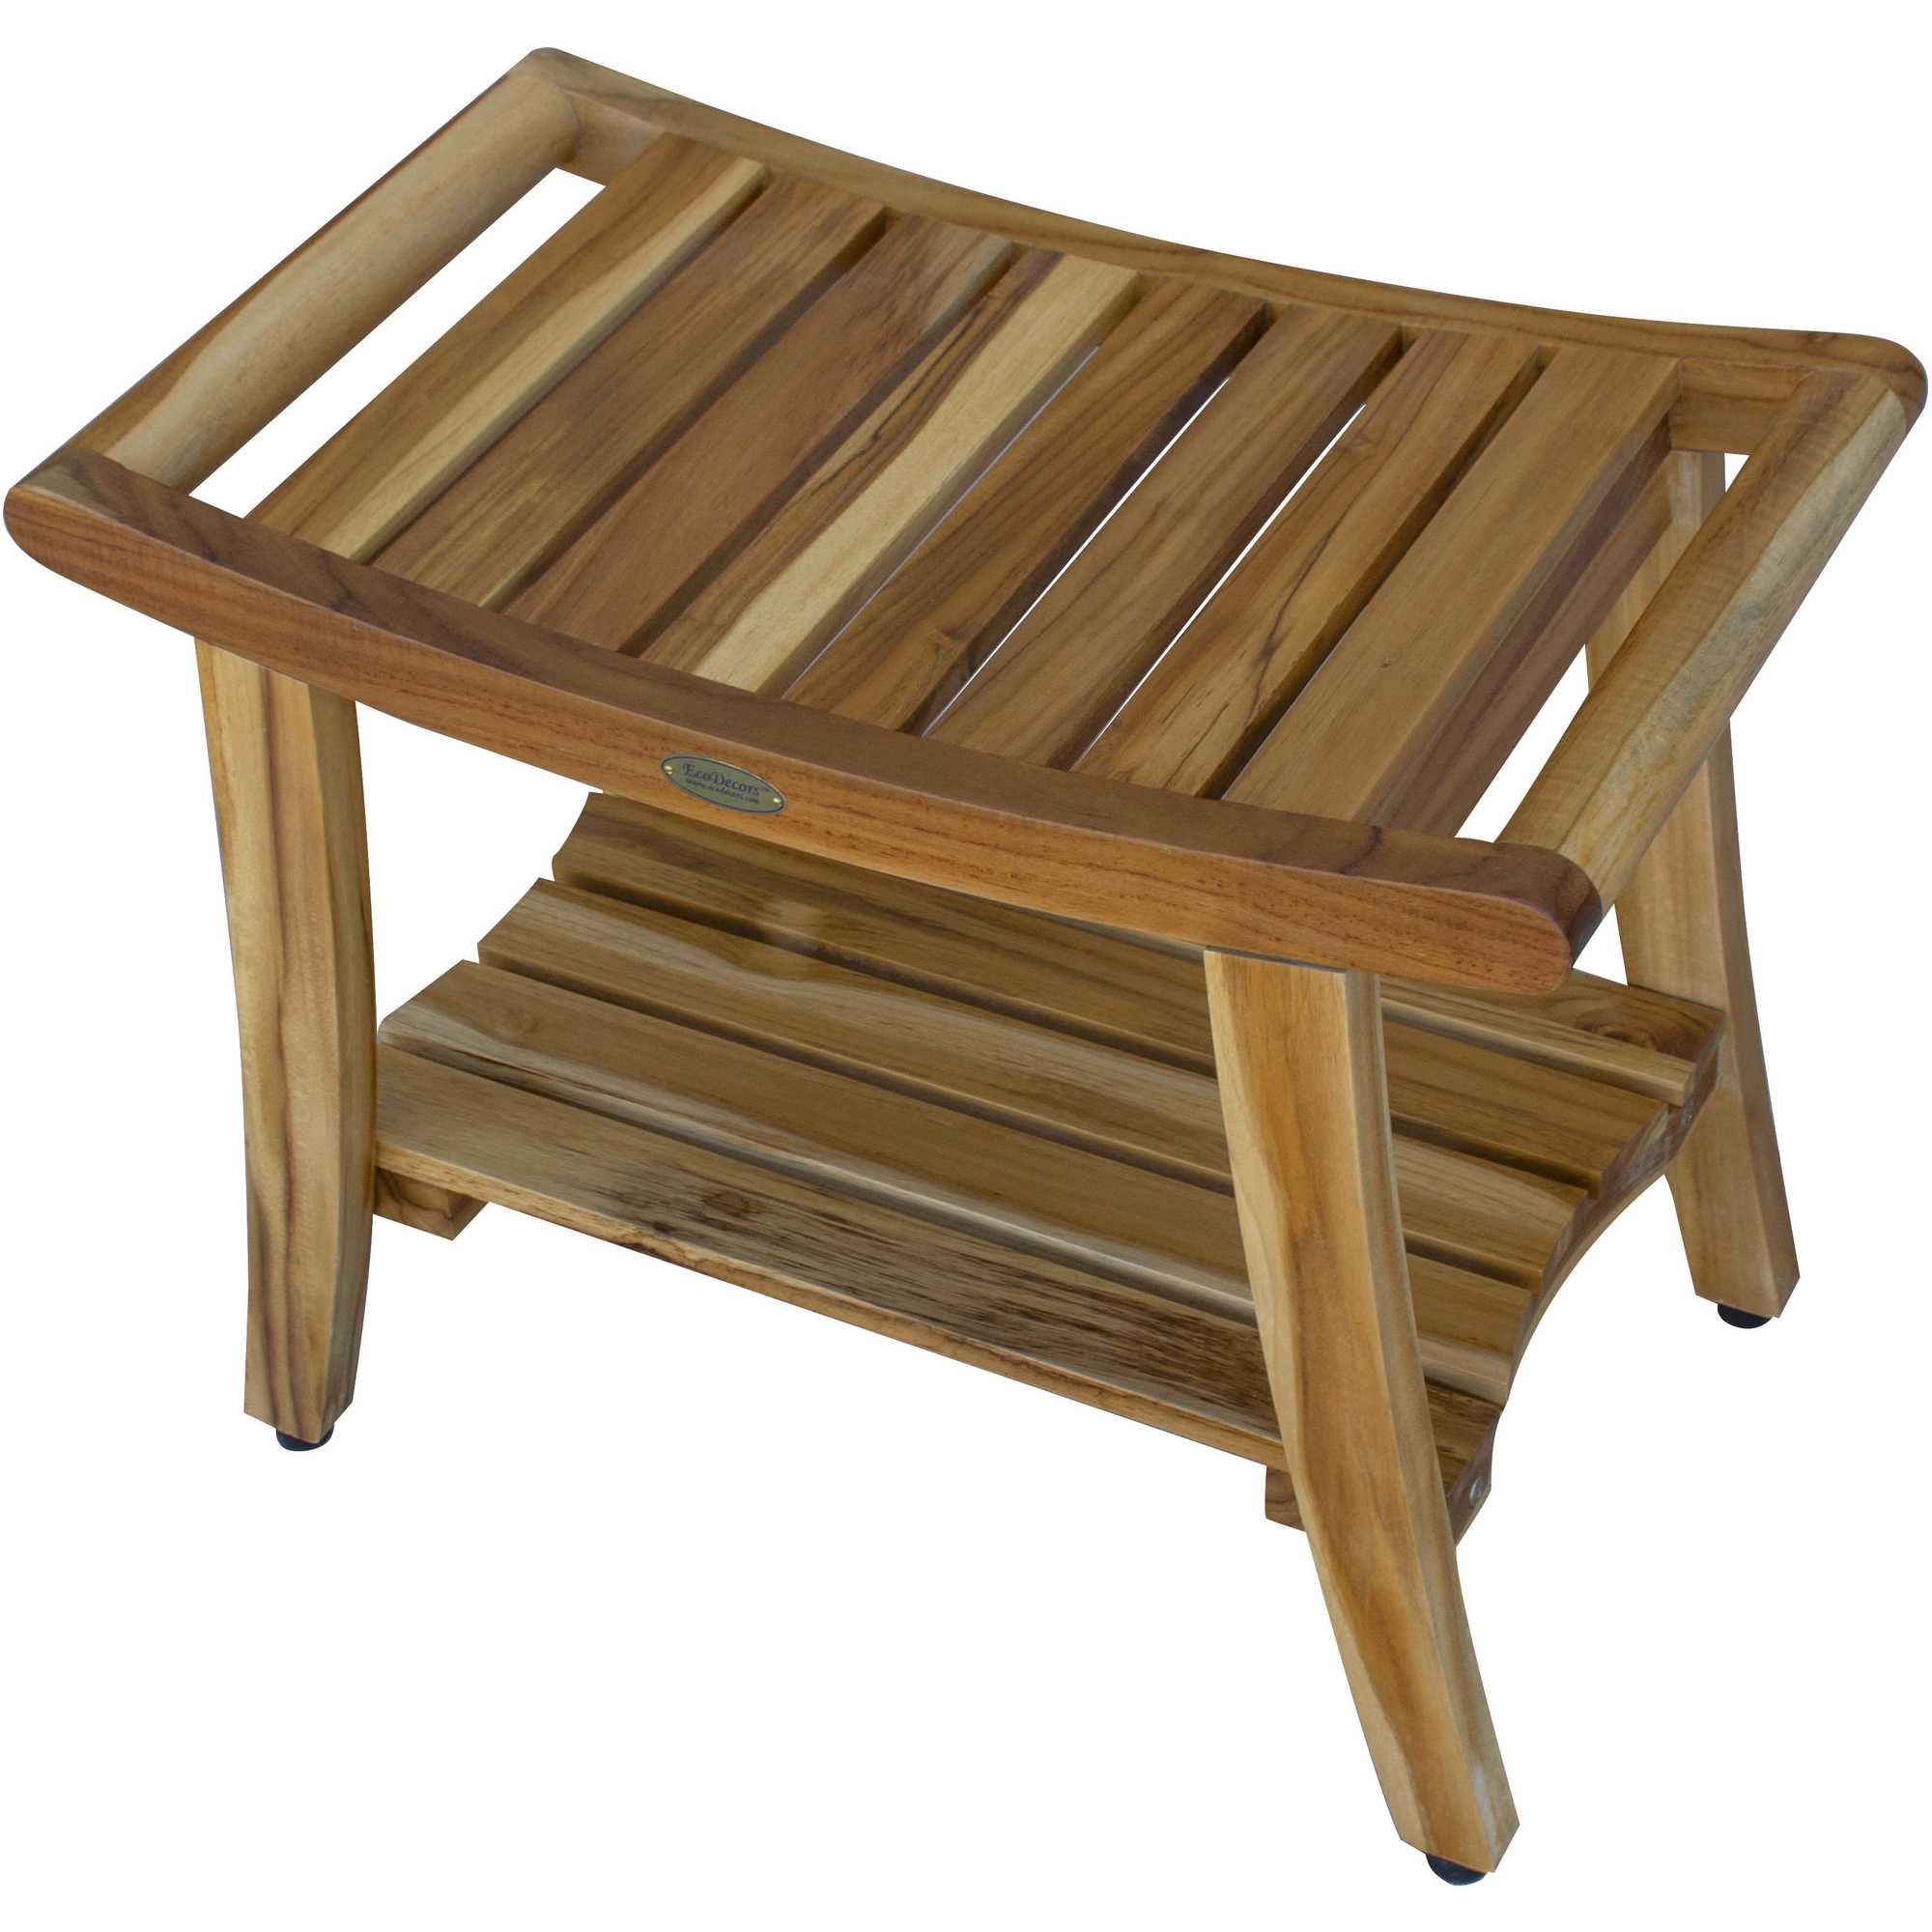 Contemporary Teak Shower Bench with Shelf in Natural Finish